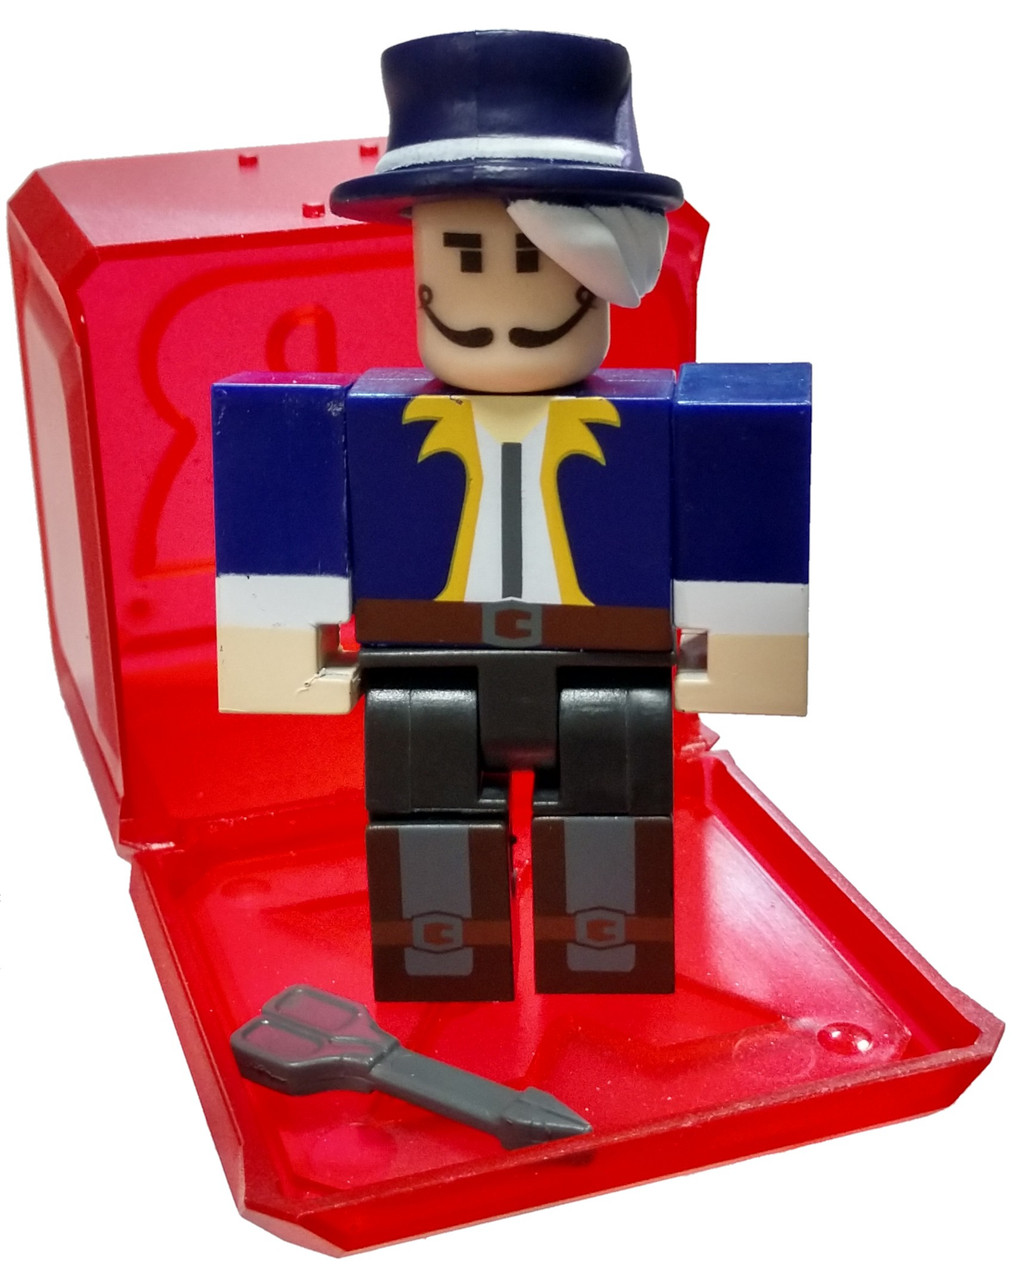 Roblox Celebrity Collection Series 5 Vesteria Barber S 3 Mini Figure With Red Cube And Online Code Loose Jazwares Toywiz - roblox toys series 5 red valk